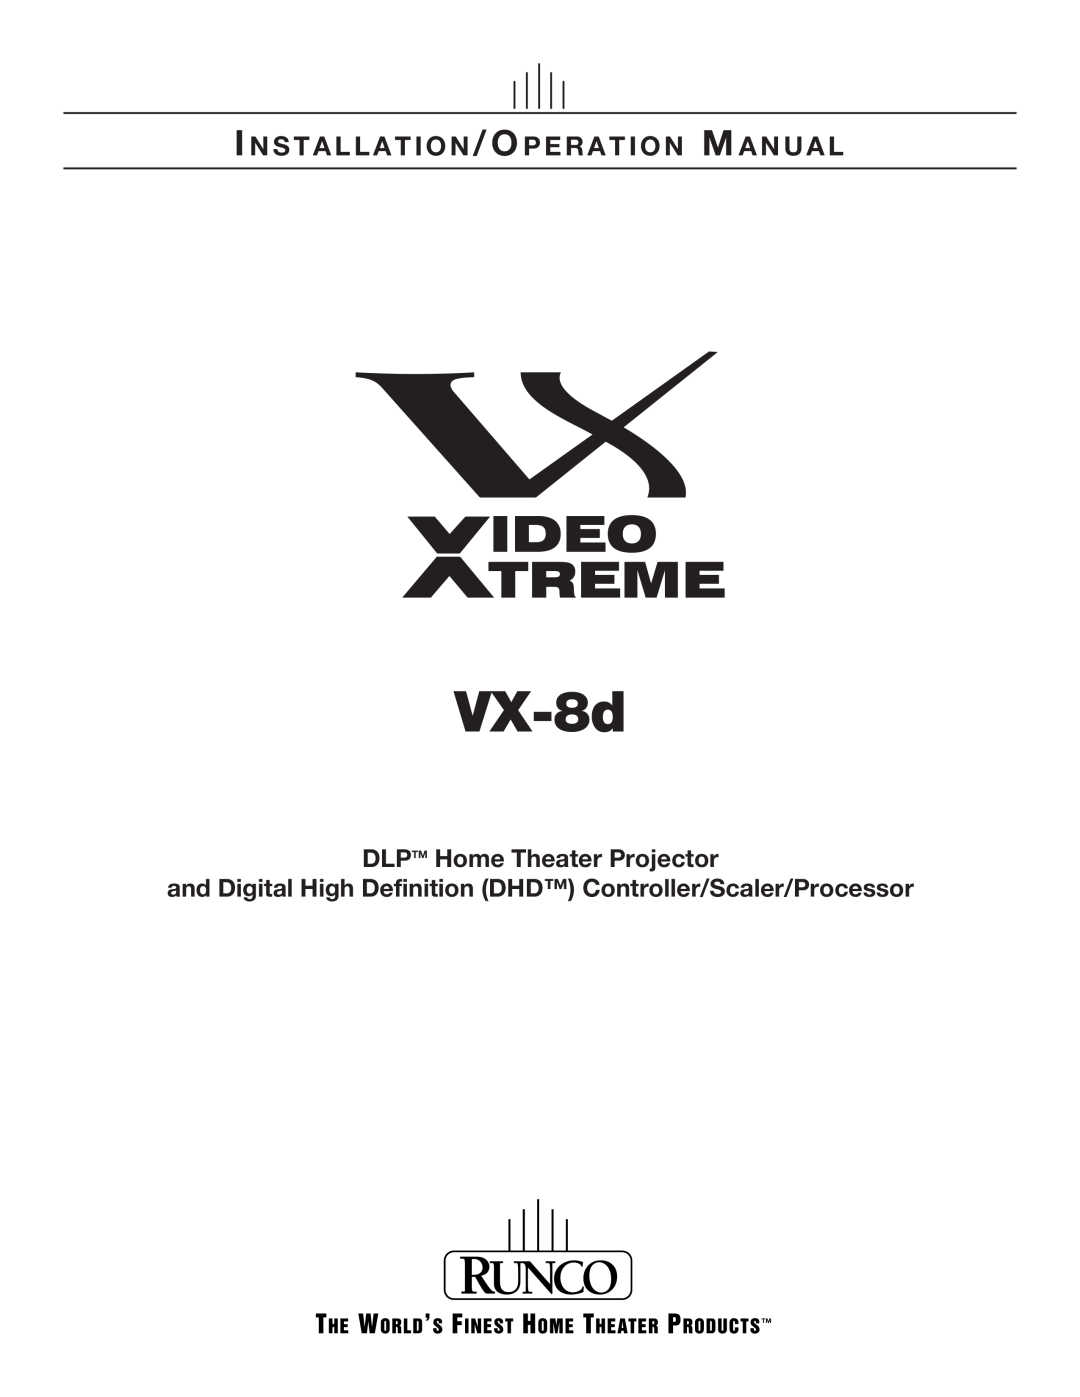 Runco VX-8D operation manual VX-8d, I N S T A L L A T I O N / O P E R A T I O N M A N U A L, DLPTM Home Theater Projector 